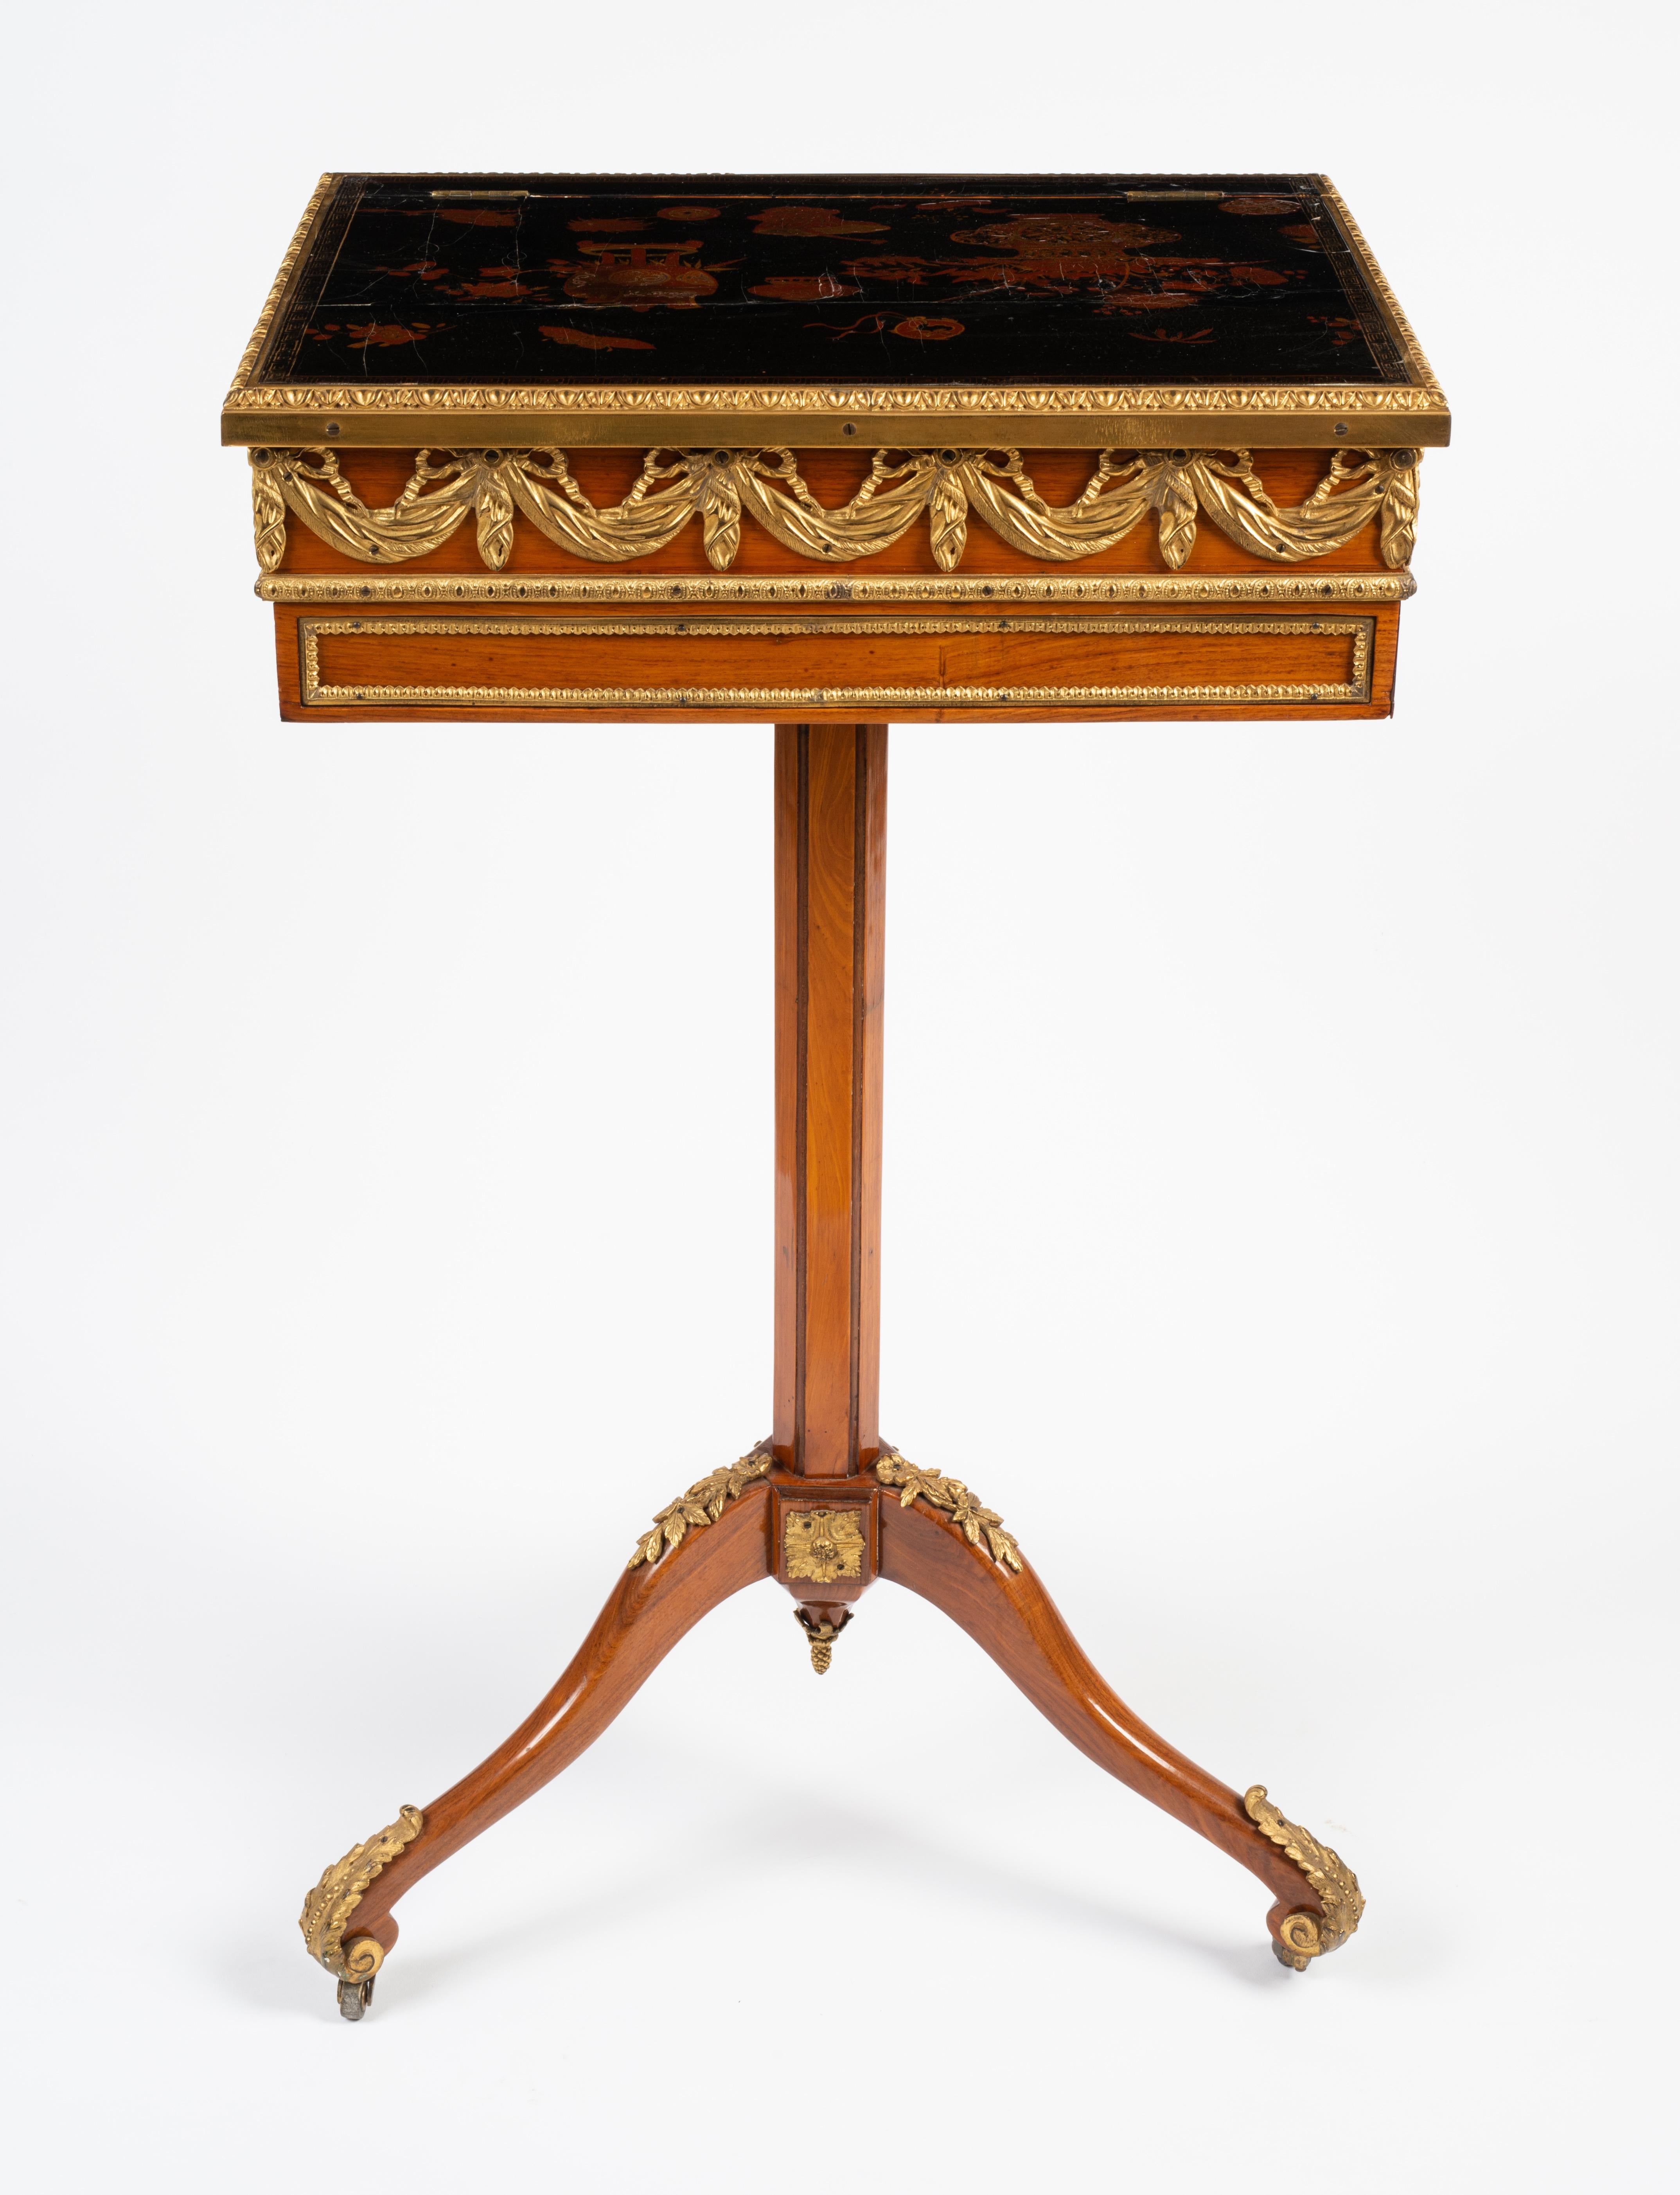 With later embellishments, the rectangular ratcheted and adjustable raisable top with book stop and lacquered top depicting vessels and plants, the ratchet with fold-out book stop, above the frieze with two opposing drawers, one fitted drawer with